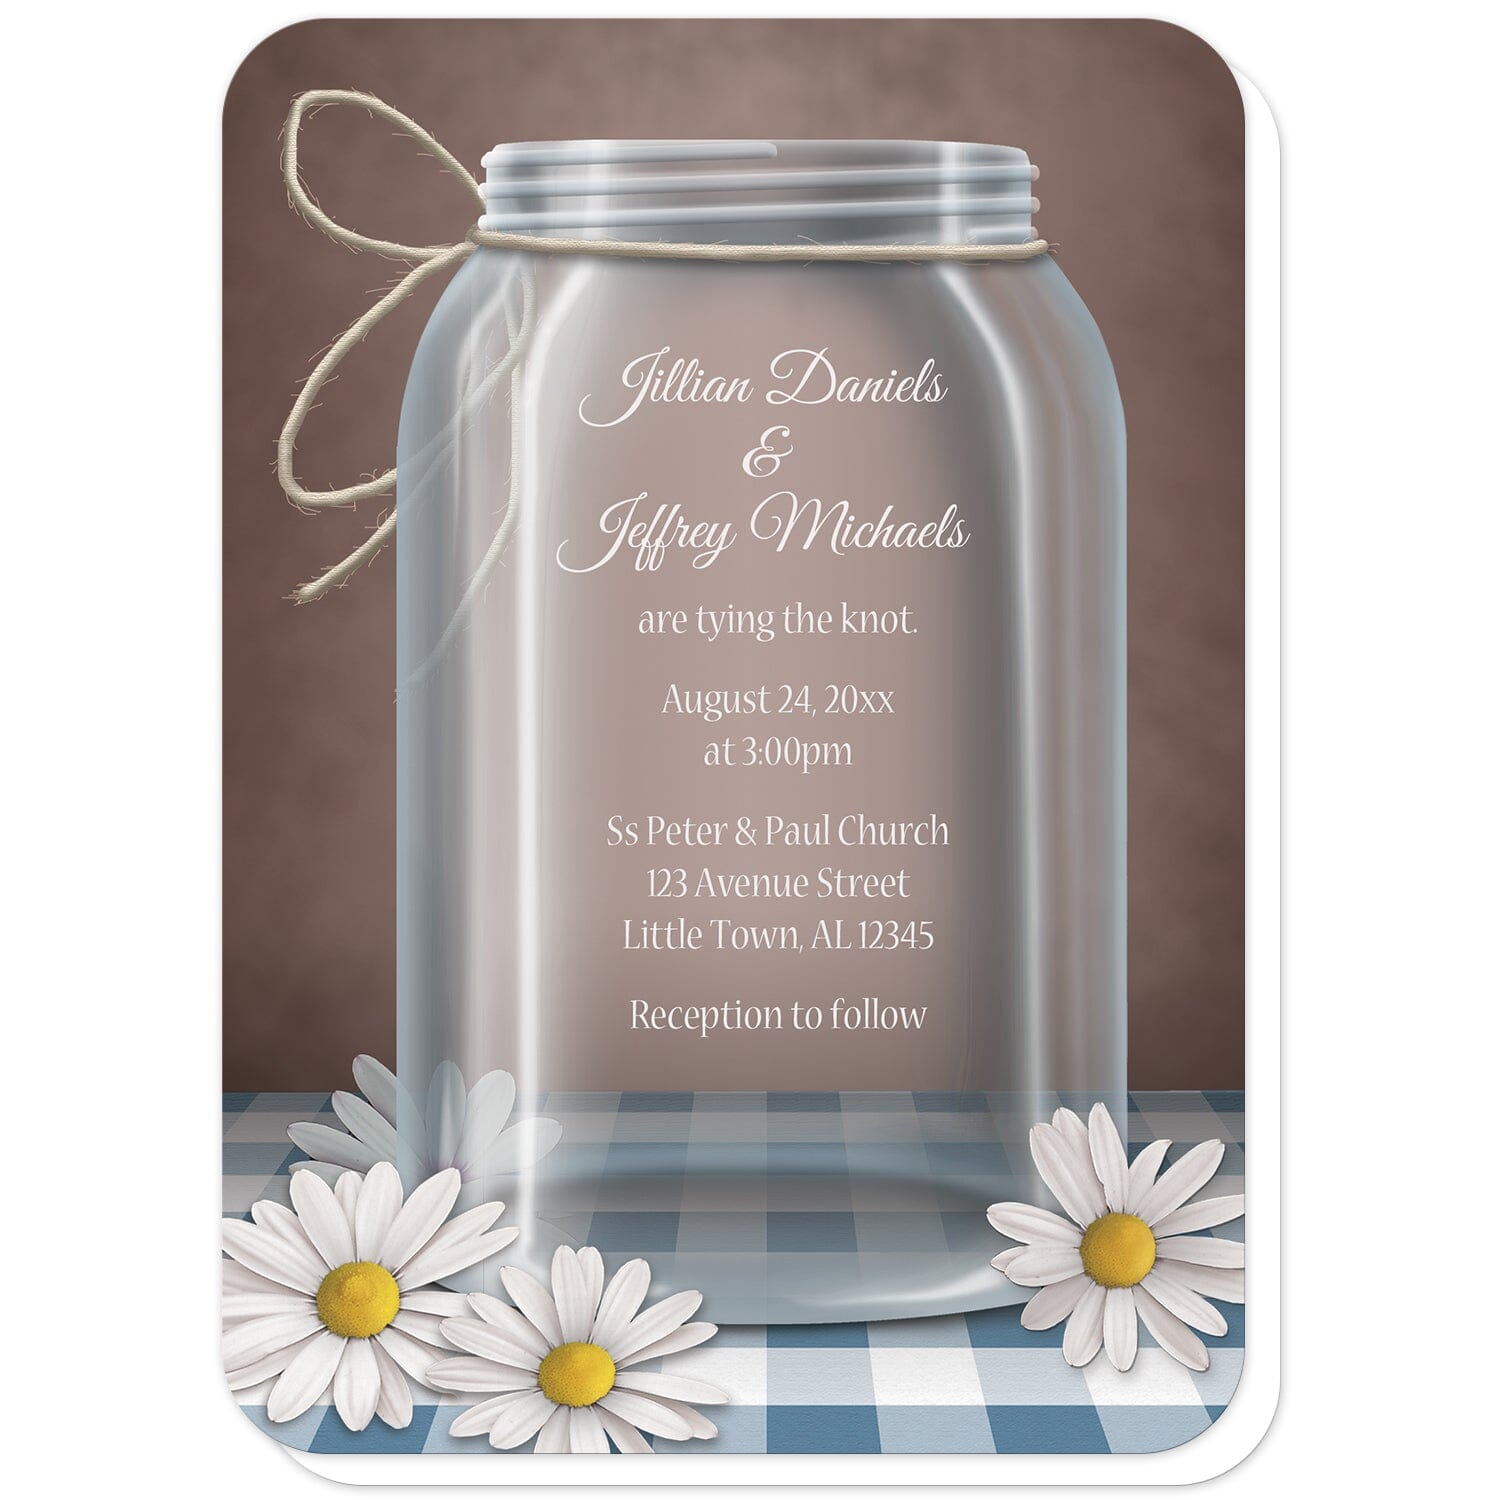 Country Mason Jar Daisy Gingham Wedding Invitations (with rounded corners) at Artistically Invited. Country mason jar daisy gingham wedding invitations featuring a beautiful illustration of a glass mason jar with twine tied around the neck of it. White daisies are scattered, laying at the base of the jar on a blue gingham table top over a vintage brown background design. 